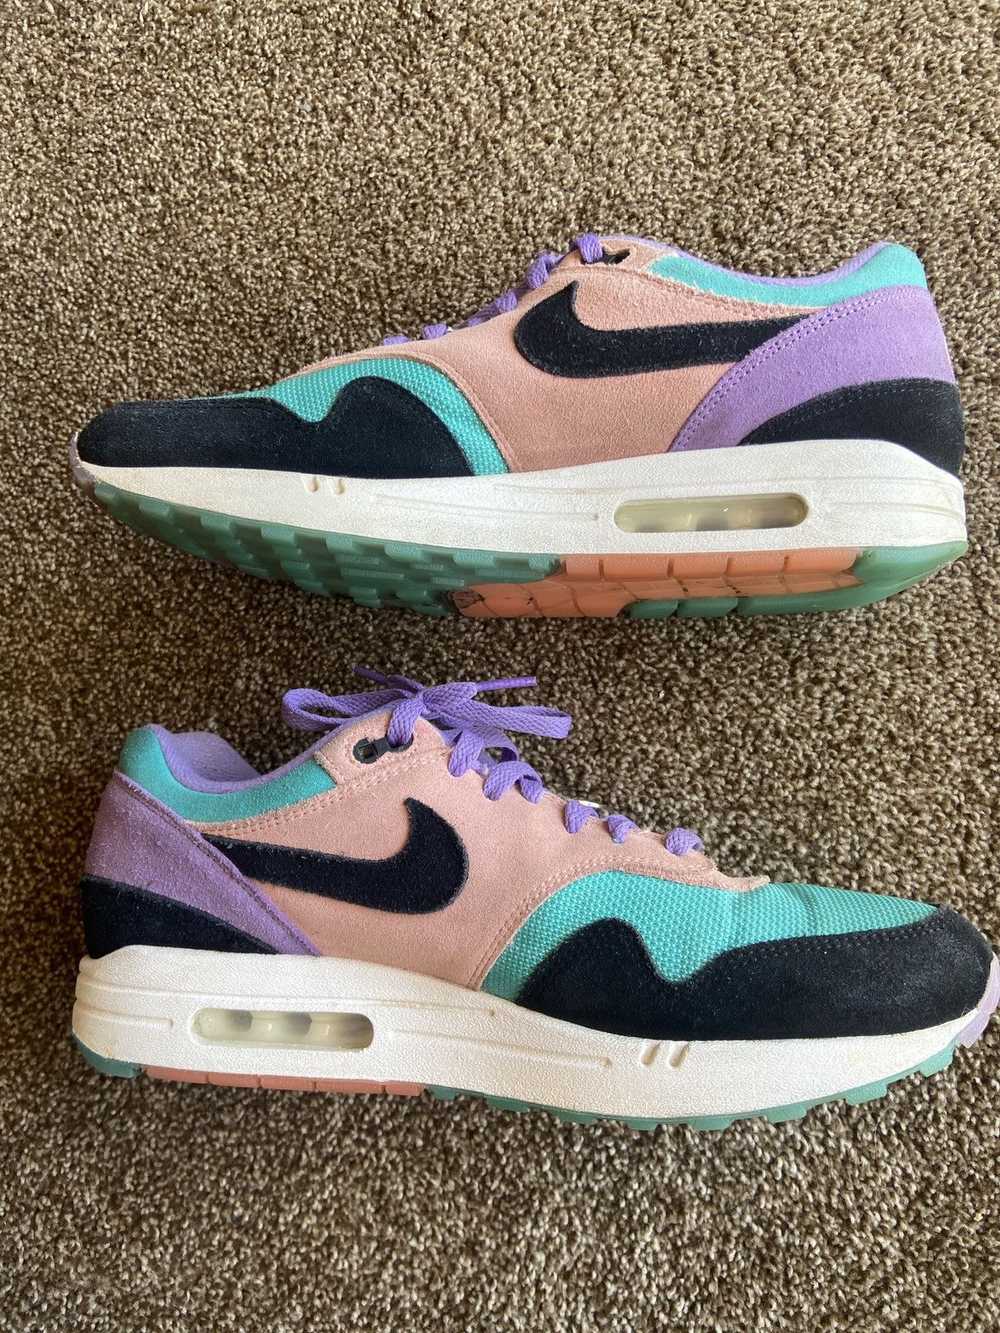 Nike Air max 1 nd have a Nike day - image 2